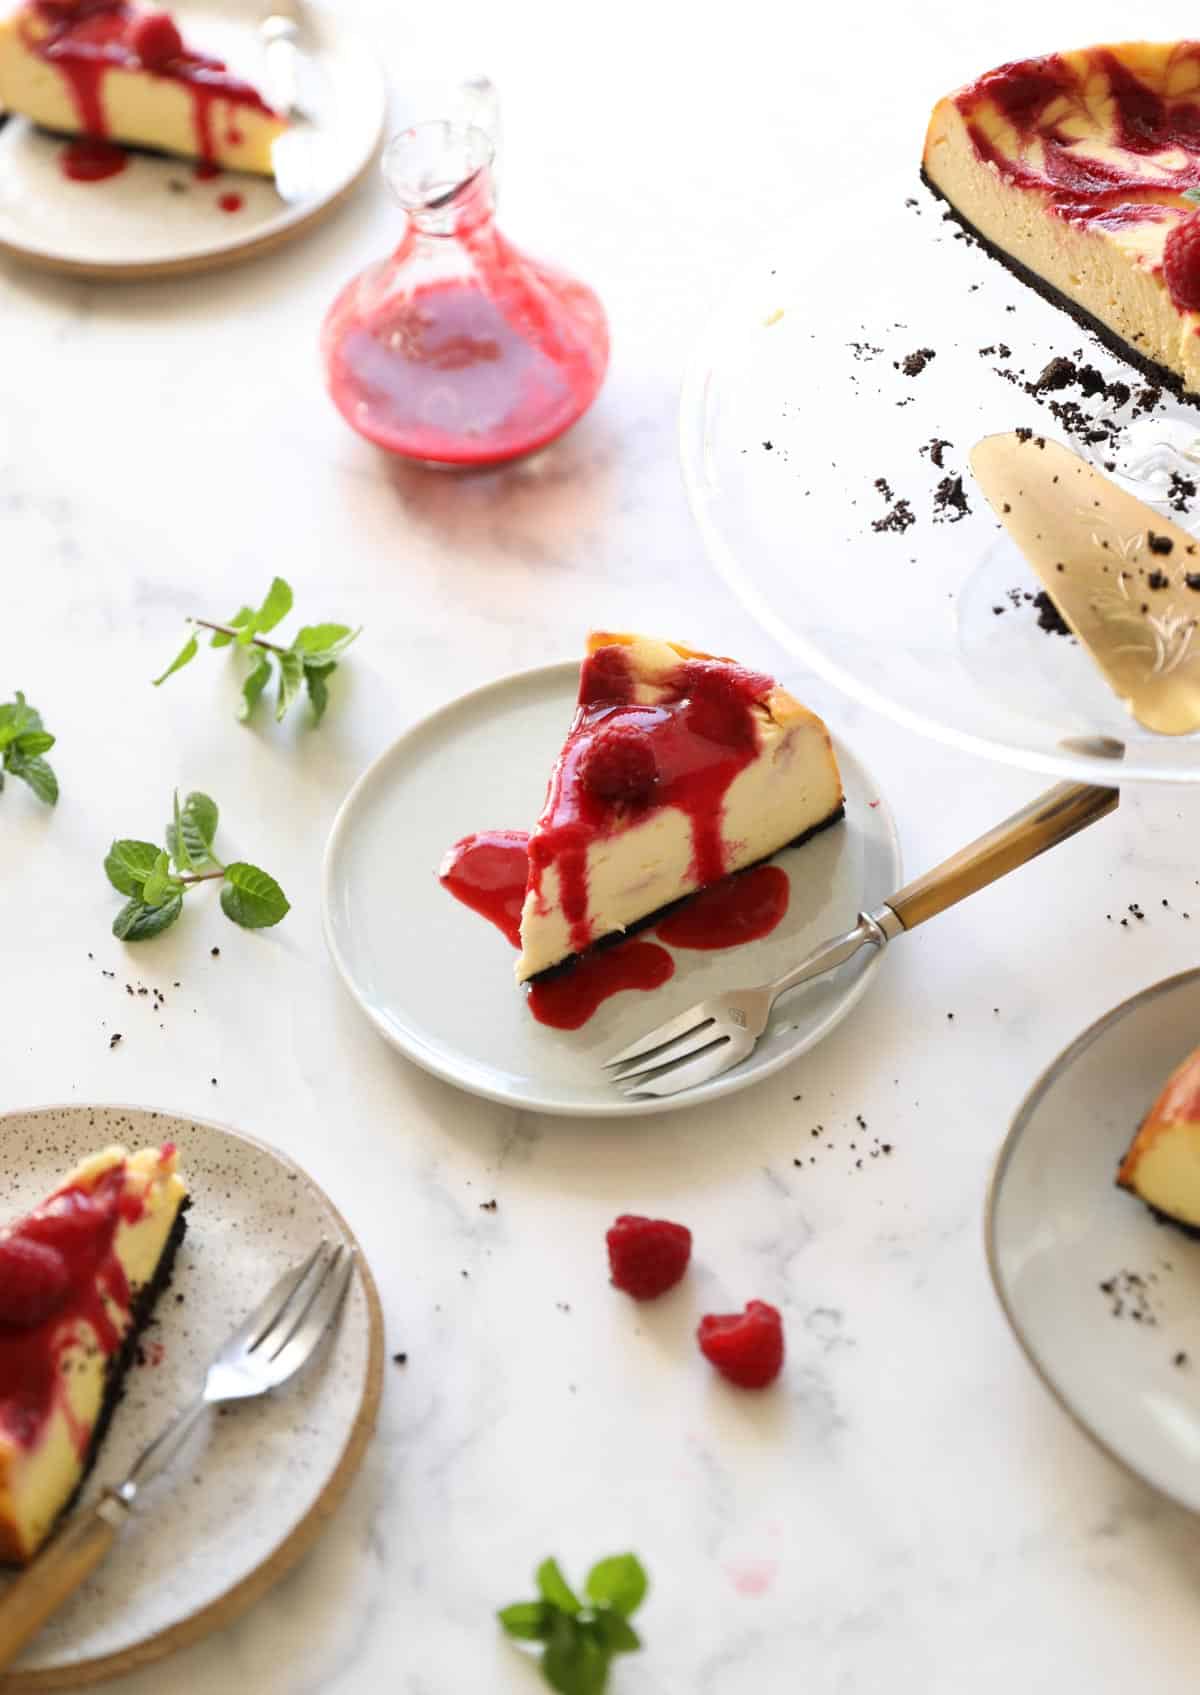 Slices of cheesecake served with raspberry sauce